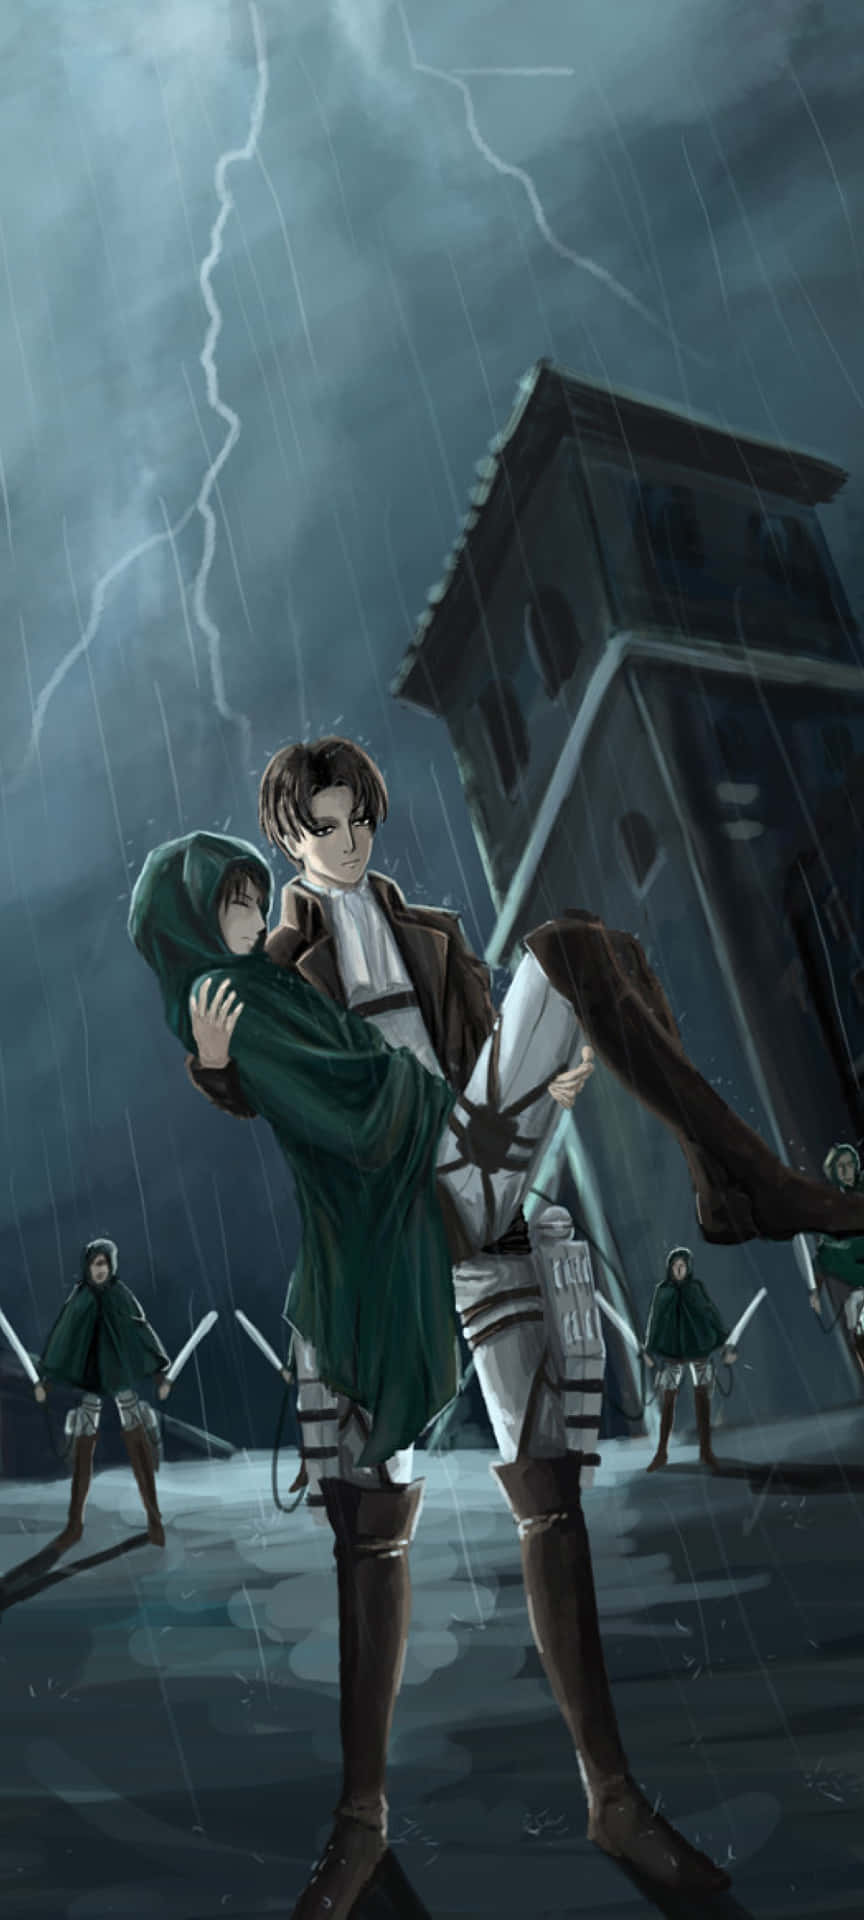 "Levi Ackerman from Attack on Titan ready for battle" Wallpaper